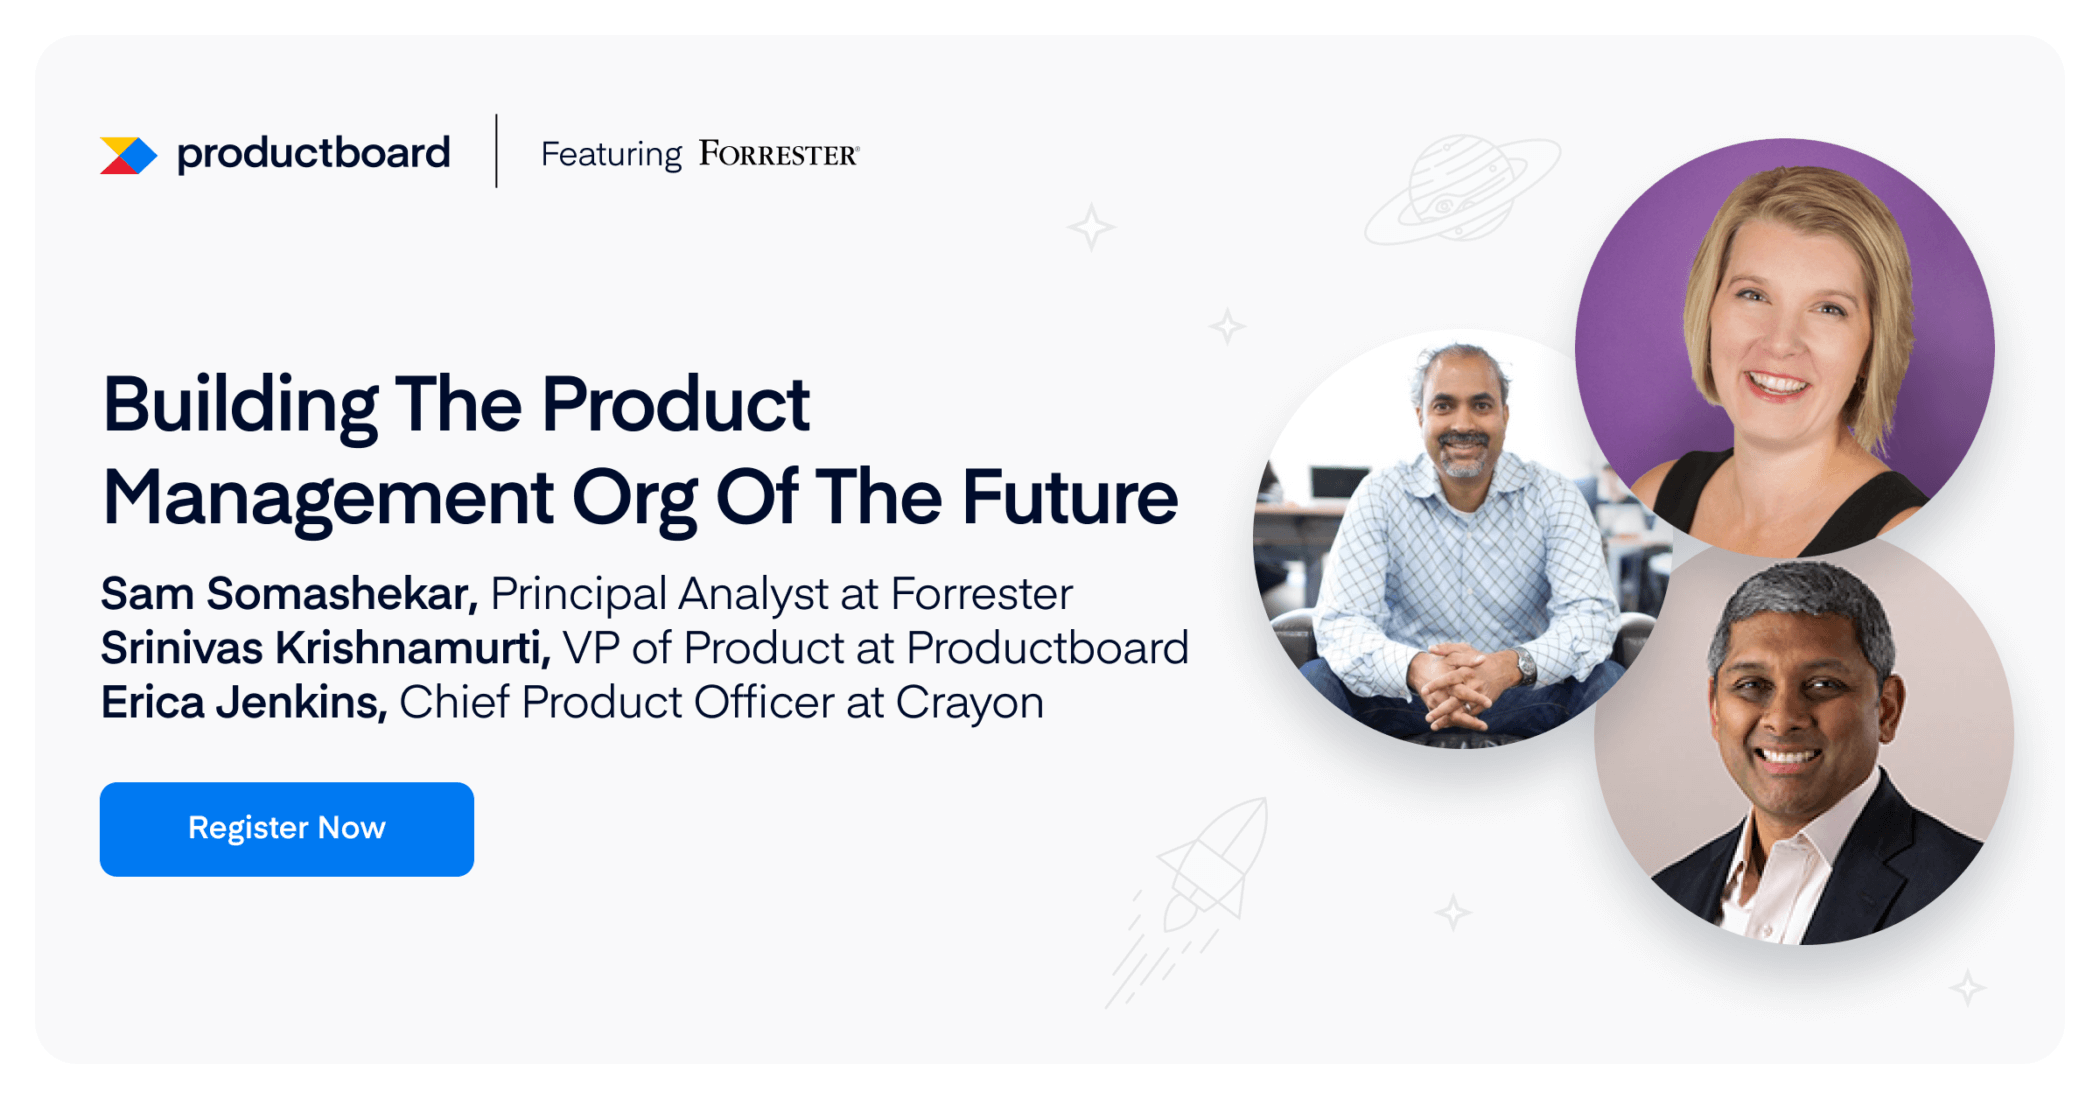 Building the Product Management Organization of the Future